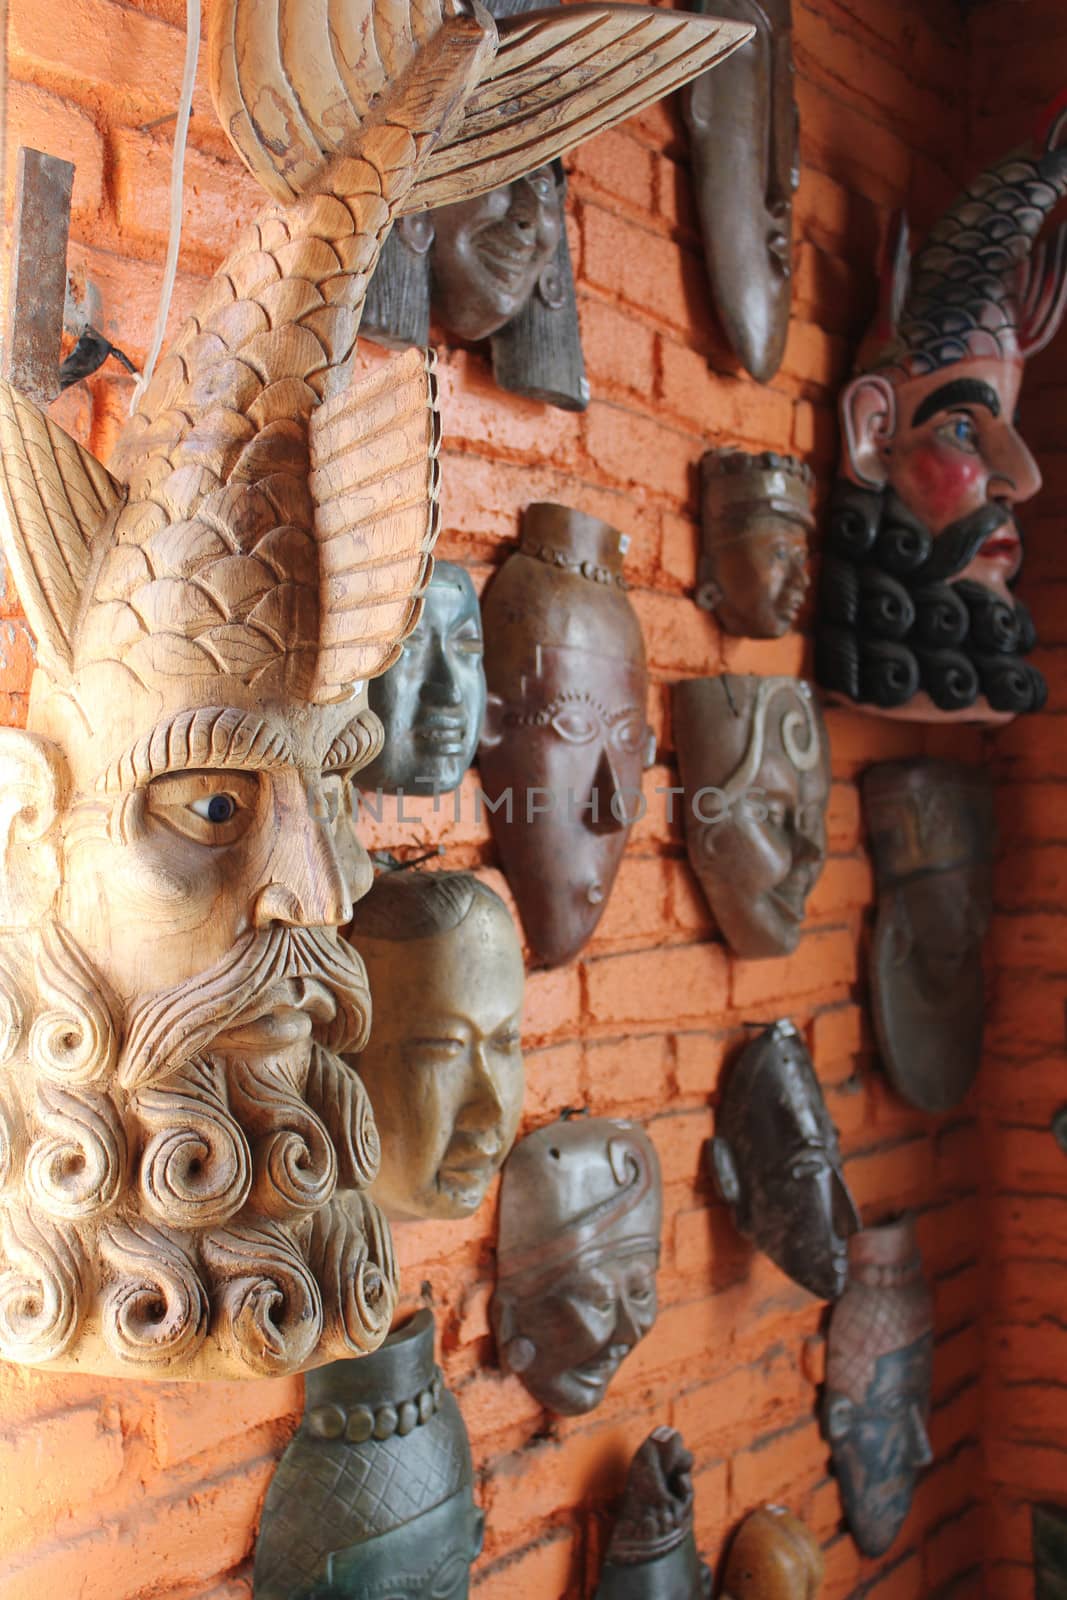 Carved and painted wooden Mayan masks on display (and for sale) on a brick wall in an indoor market in Mazatlan, Mexico